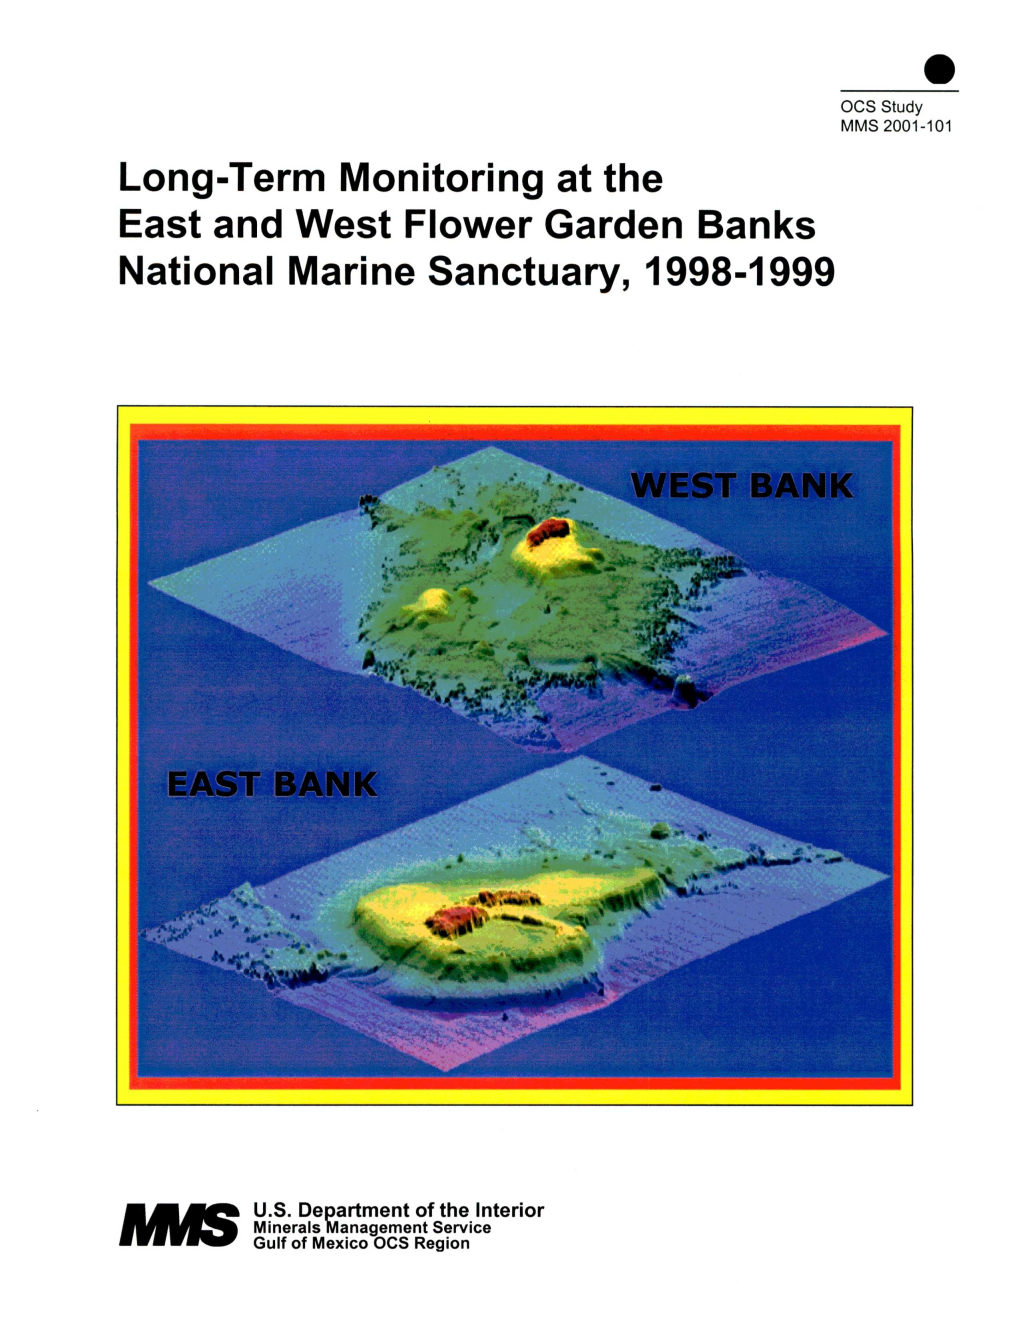 Long-Term Monitoring at the East and West Flower Garden Banks National Marine Sanctuary, 1998-1999